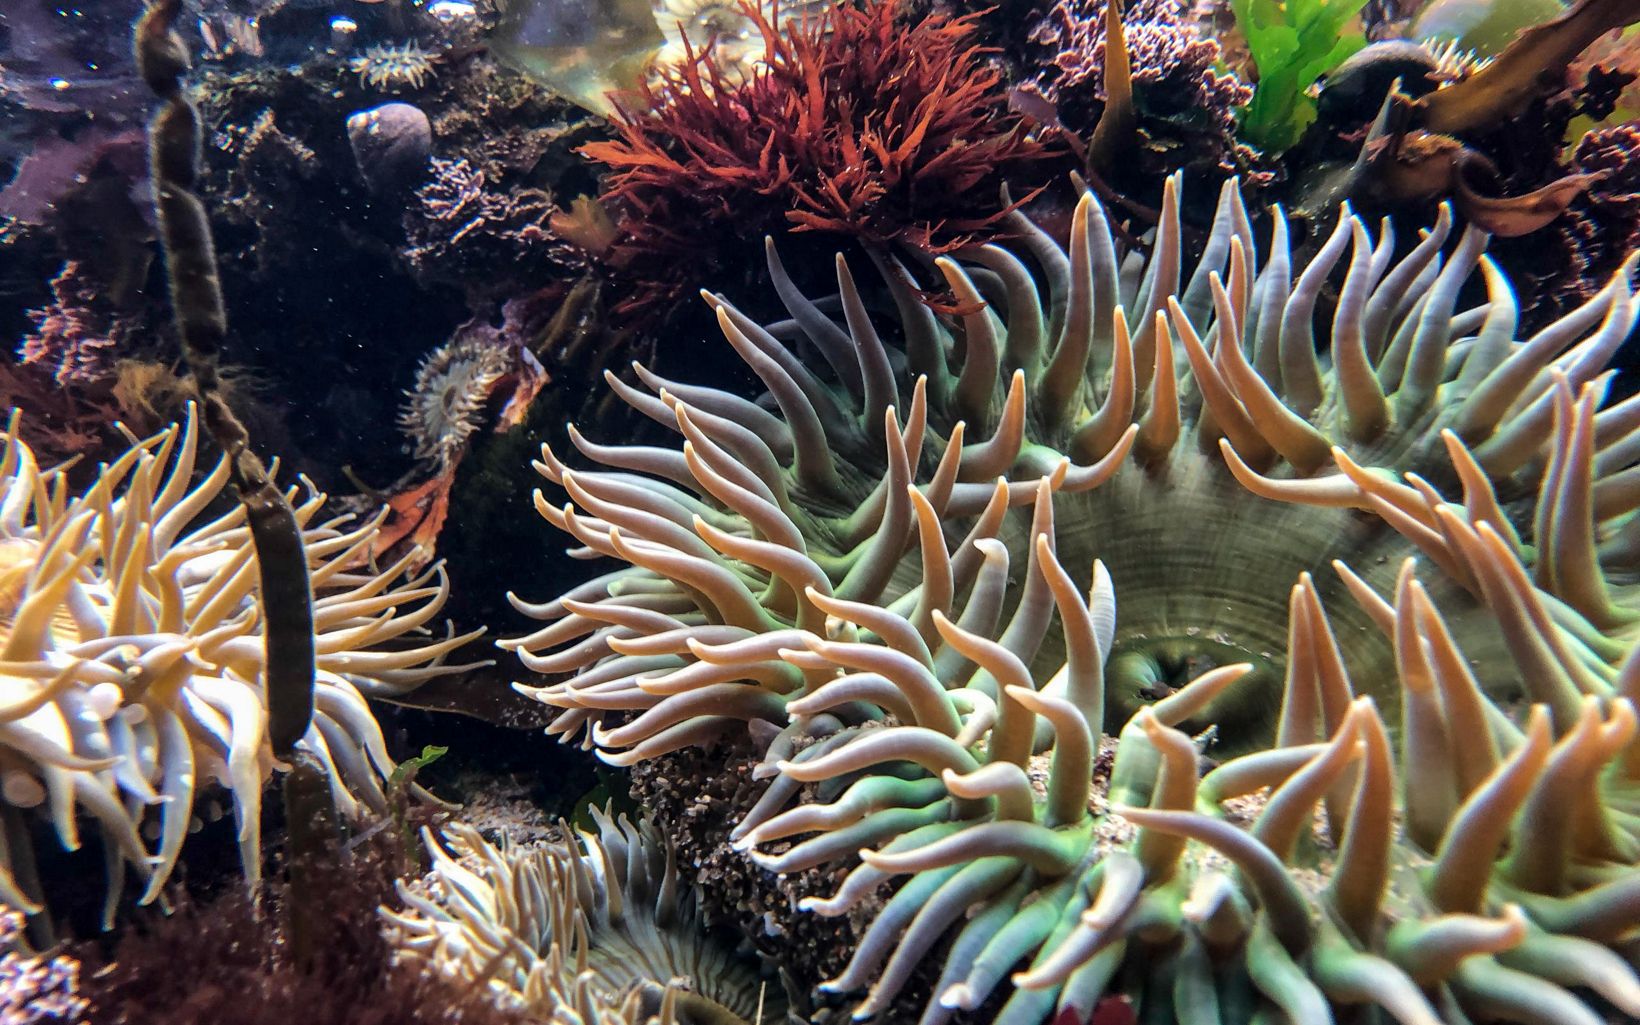 TNC's Dangermond Preserve, California. Sea anemones and other tide pool flora and fauna at Government Point.  